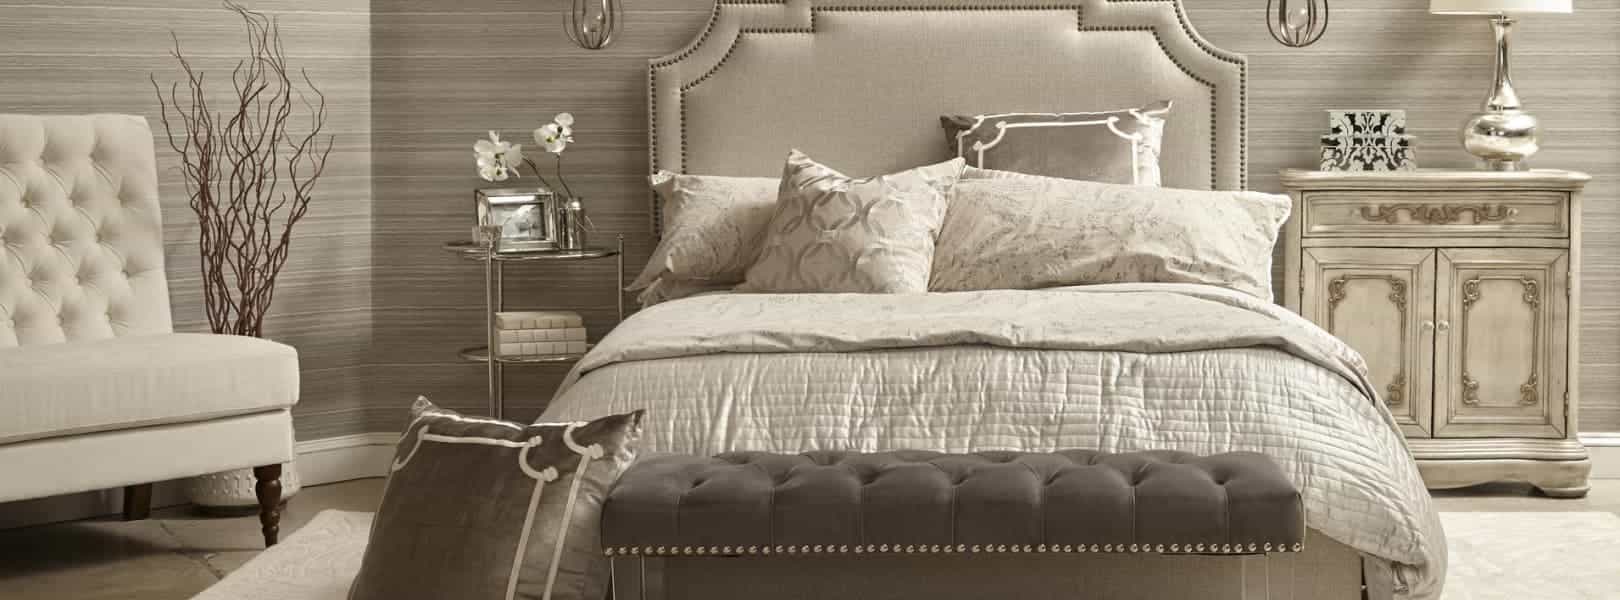 popular bedding styles for king size beds